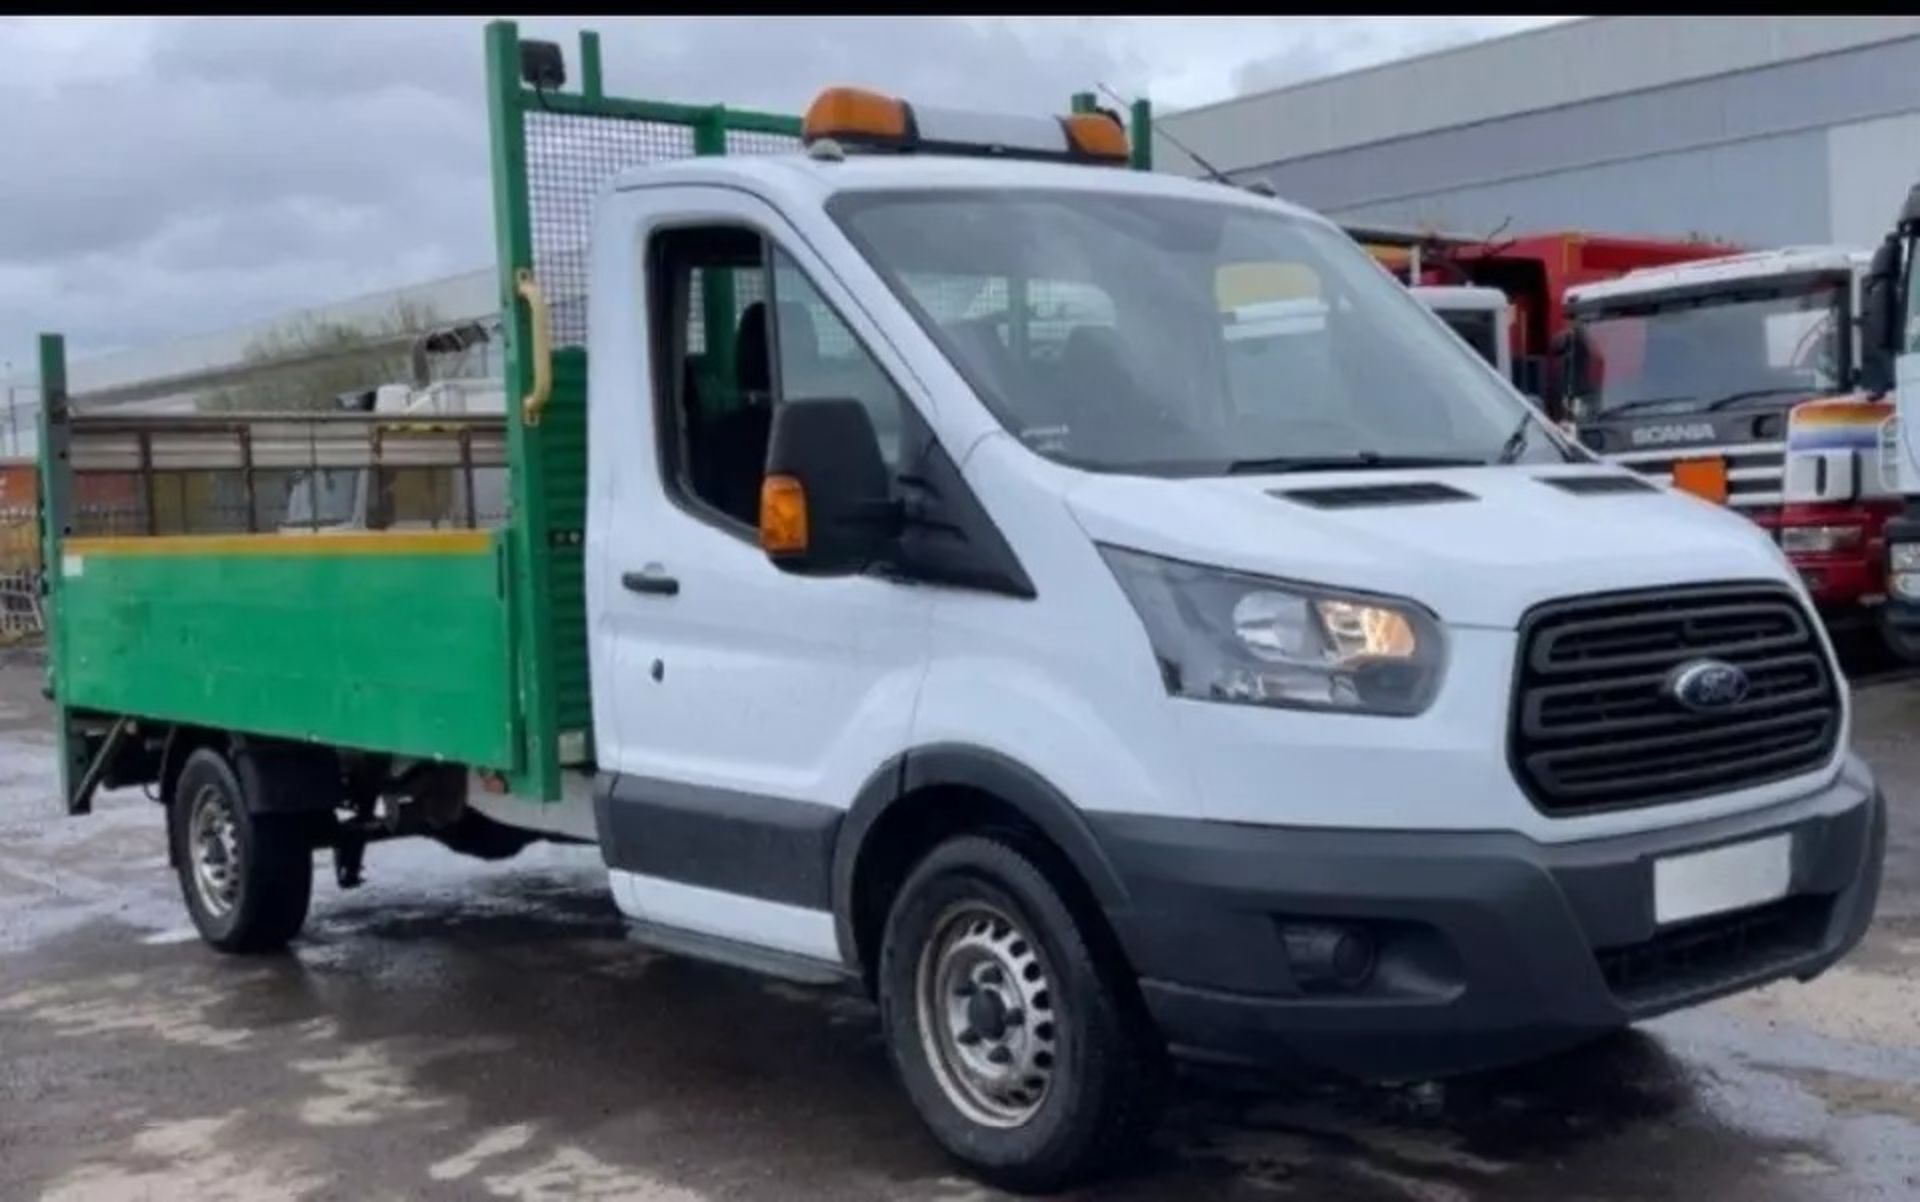 2019 FORD TRANSIT T350 LWB DROPSIDE TRUCK - VERSATILE, RELIABLE, AND READY FOR HEAVY DUTY